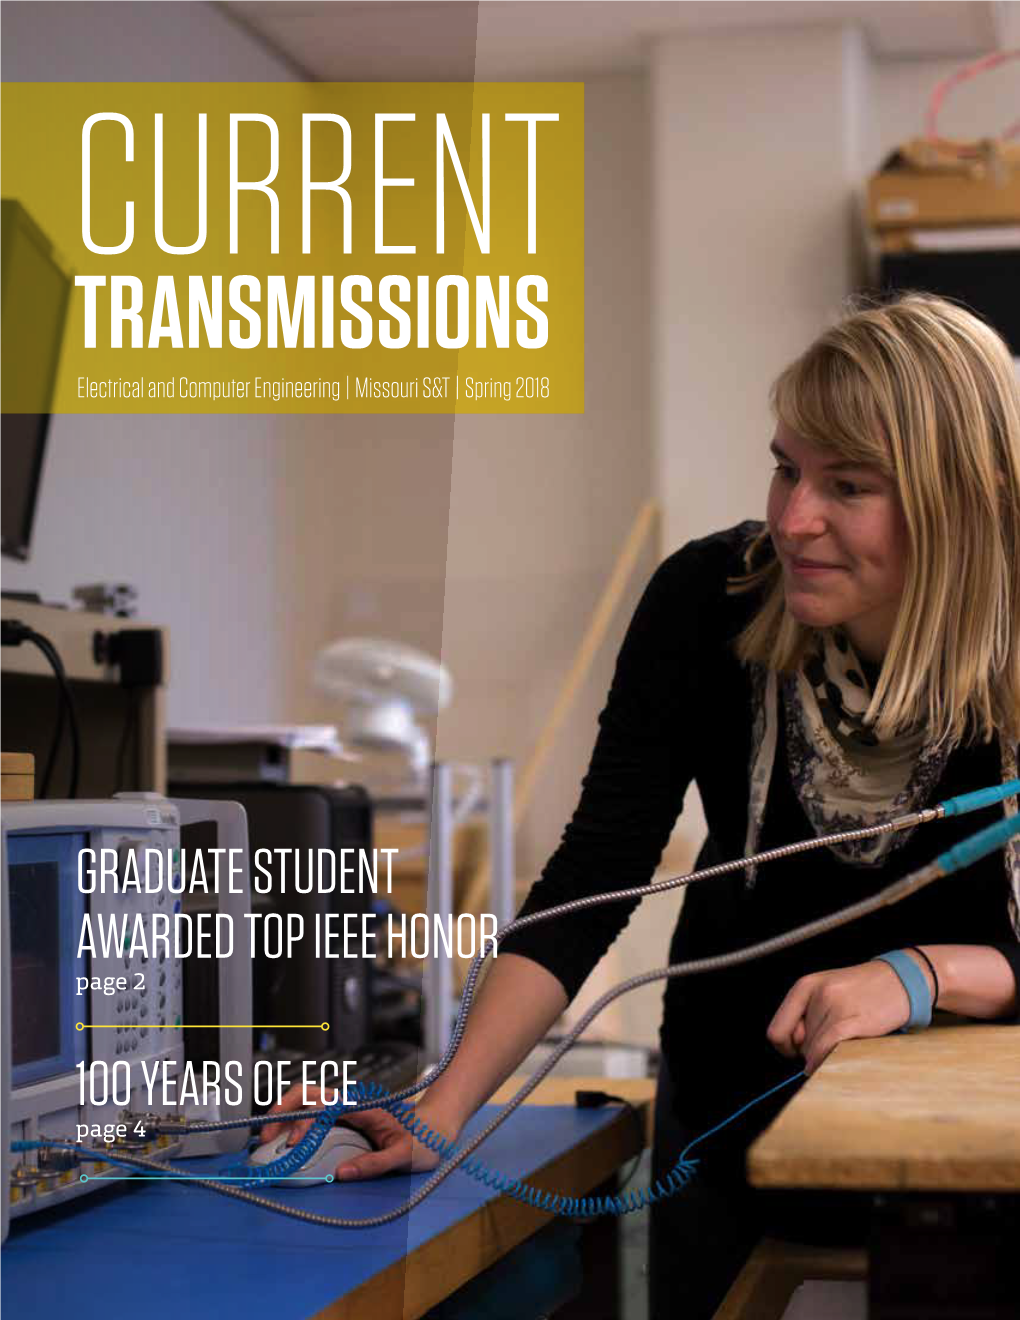 TRANSMISSIONS Electrical and Computer Engineering | Missouri S&T | Spring 2018